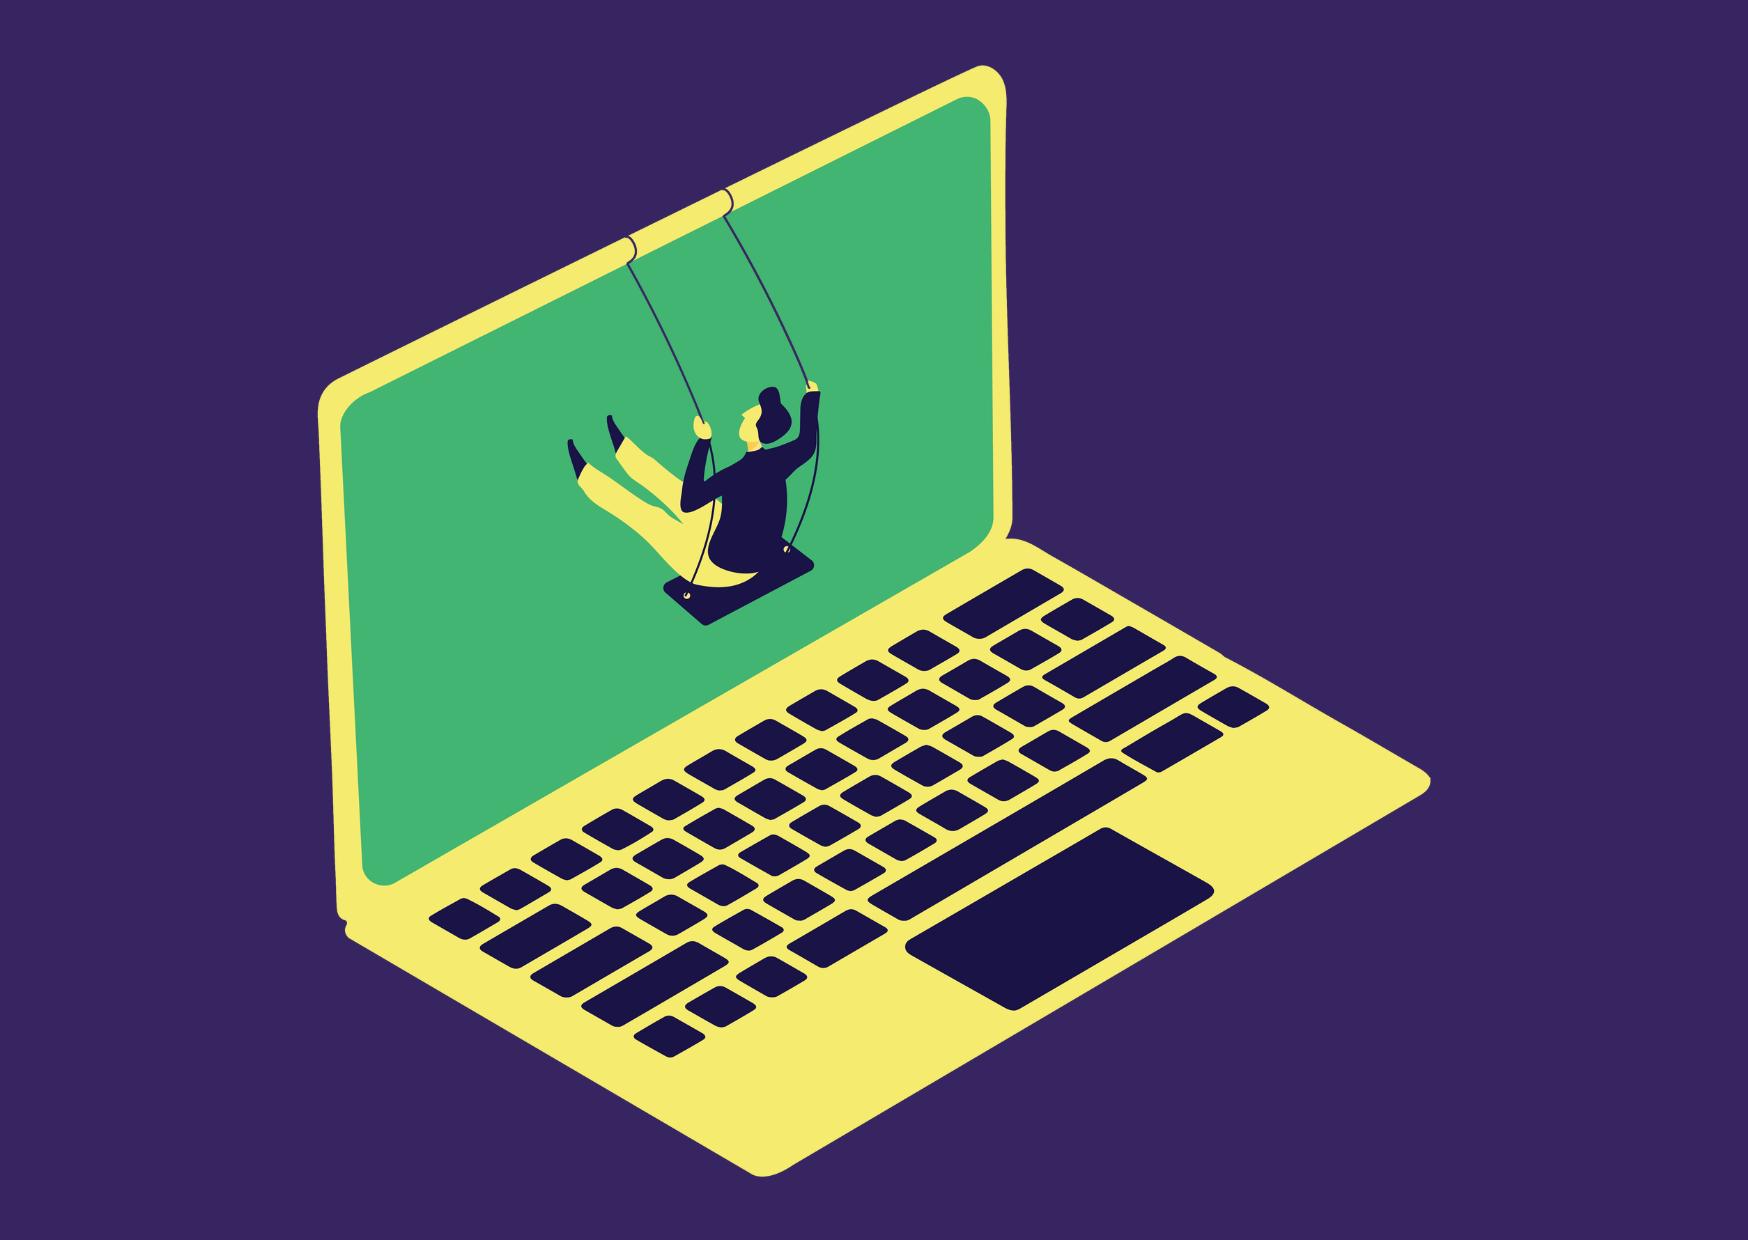 A vector image of a laptop computer mixed with a person on a swing representing play in work